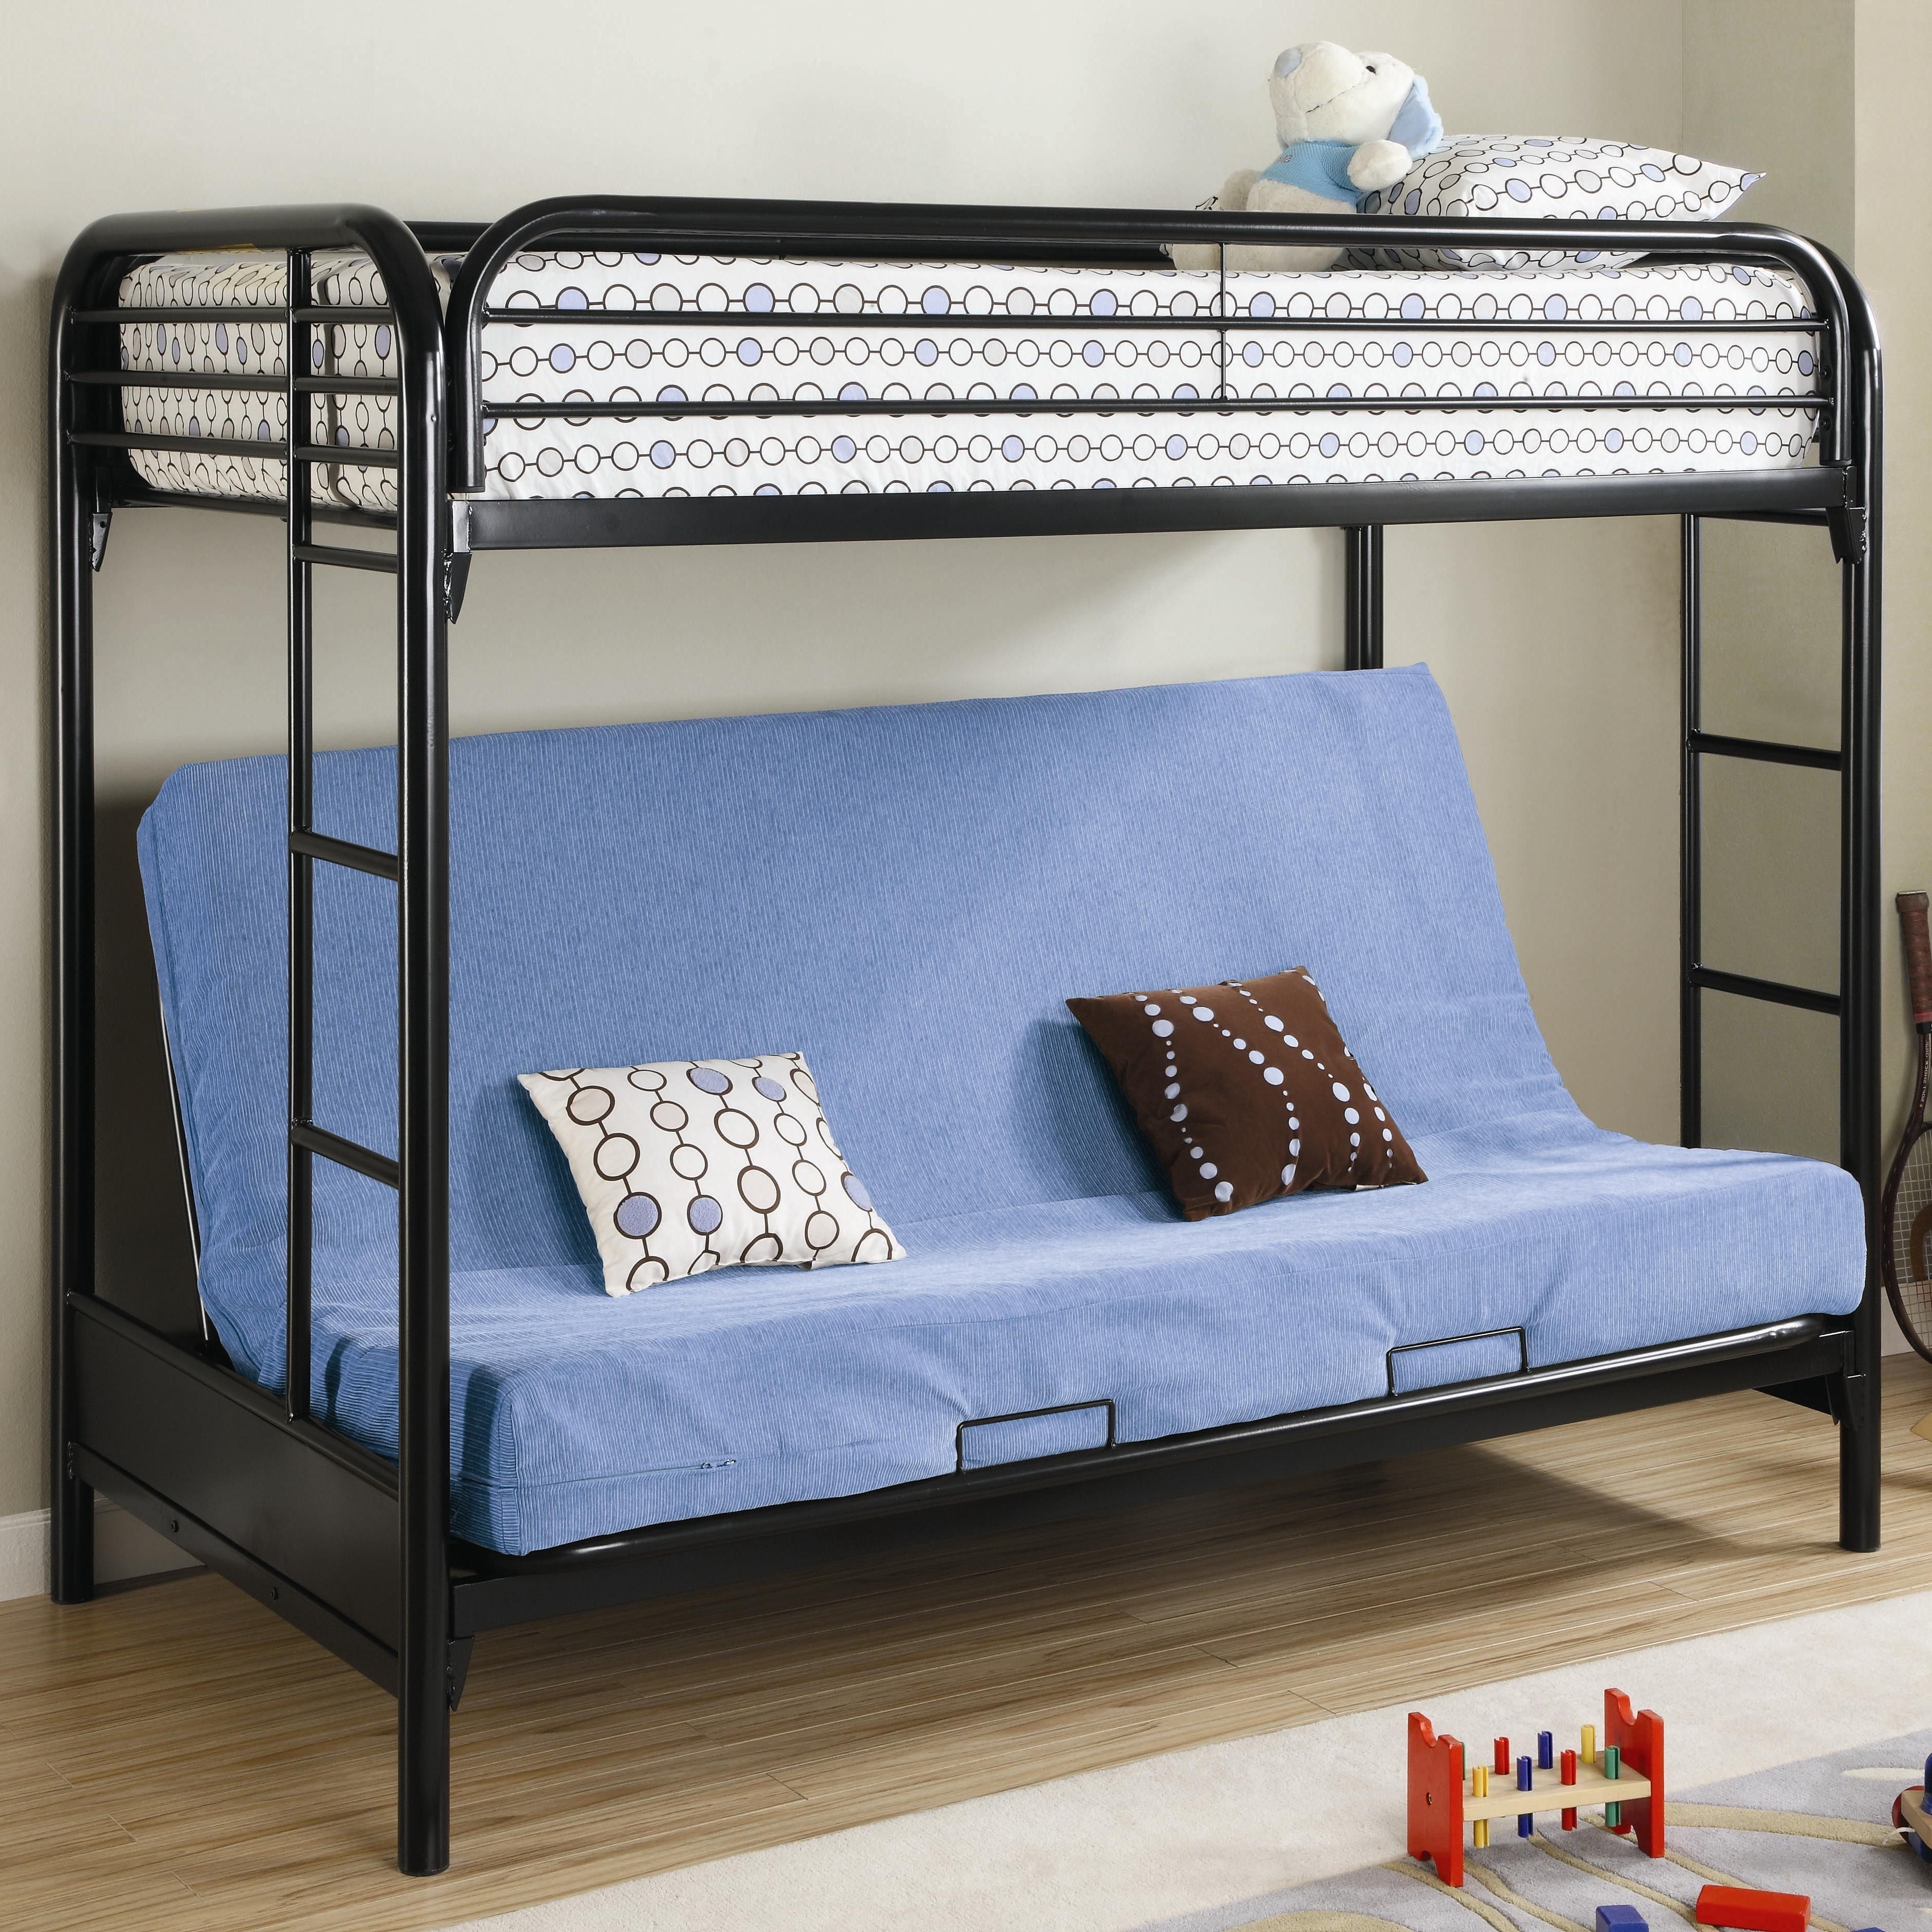 Sofa Bunk Beds Within 2018 Fordham Twin Over Full Futon Metal Bunk Bed Lowest Price – Sofa (View 18 of 20)